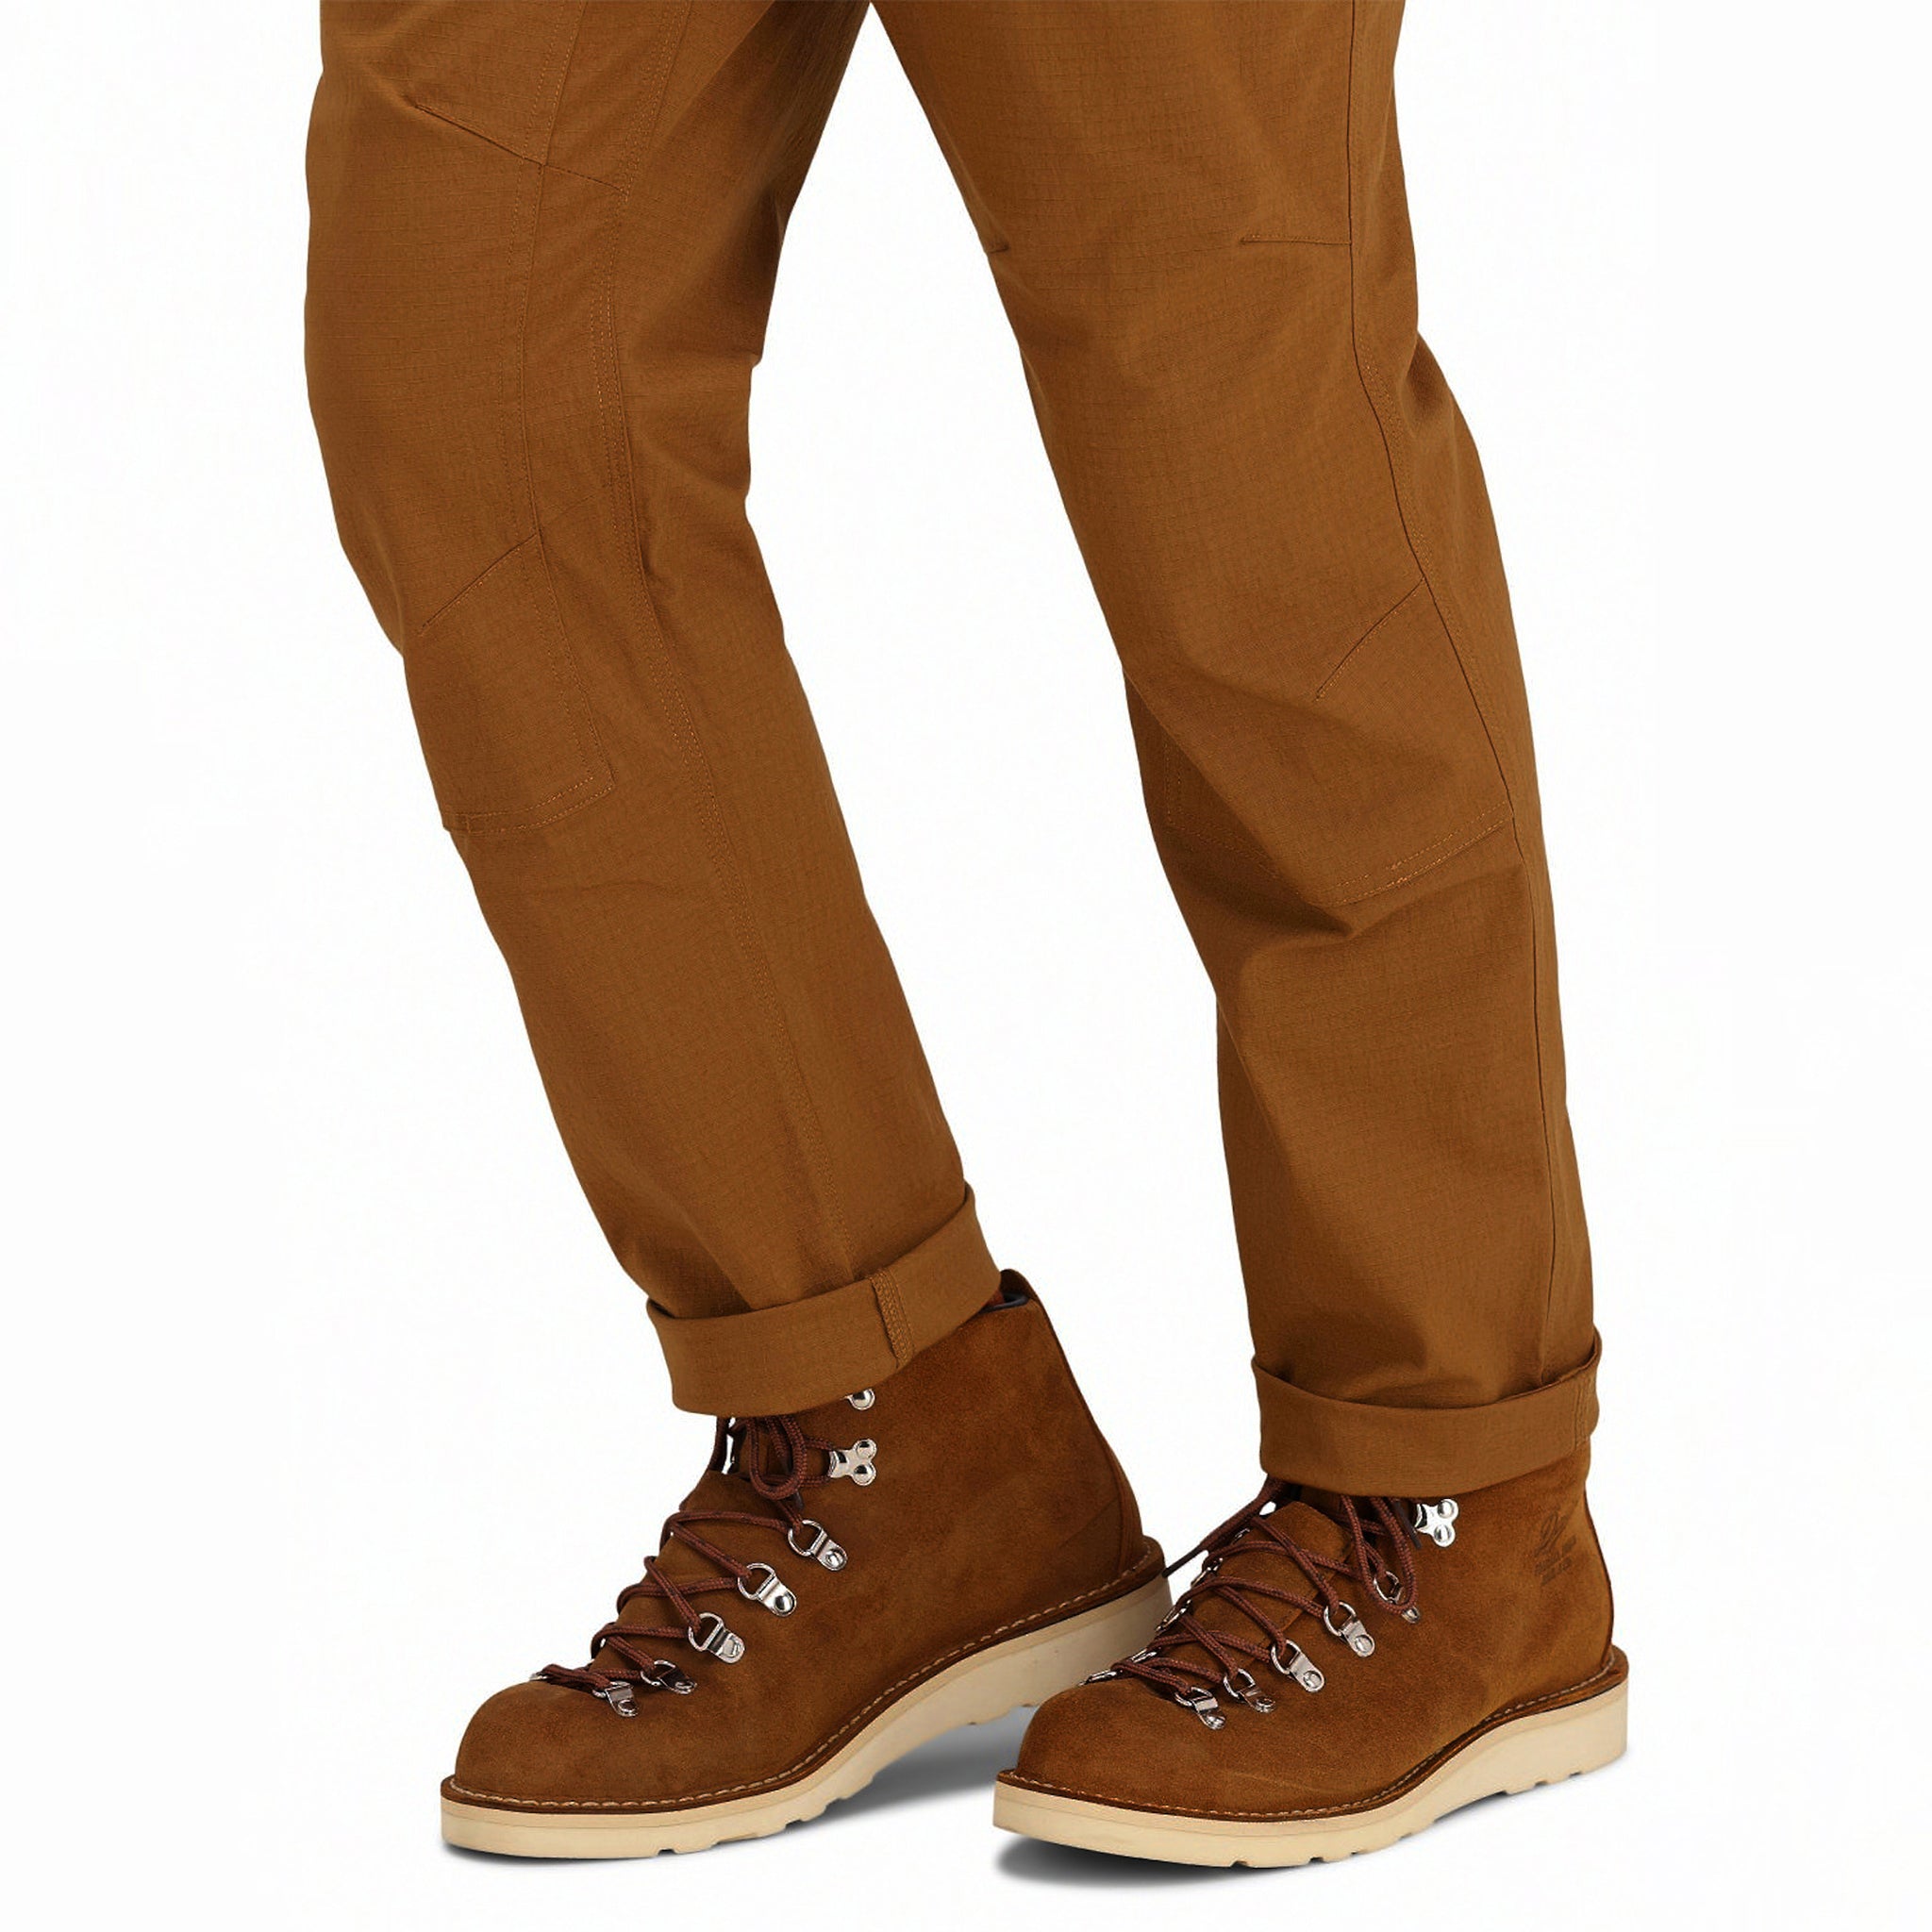 General front model shot of Topo Designs Men's Mountain lightweight hiking Pants Ripstop in "Earth" brown showing articulated knees, and cuffed ankles.